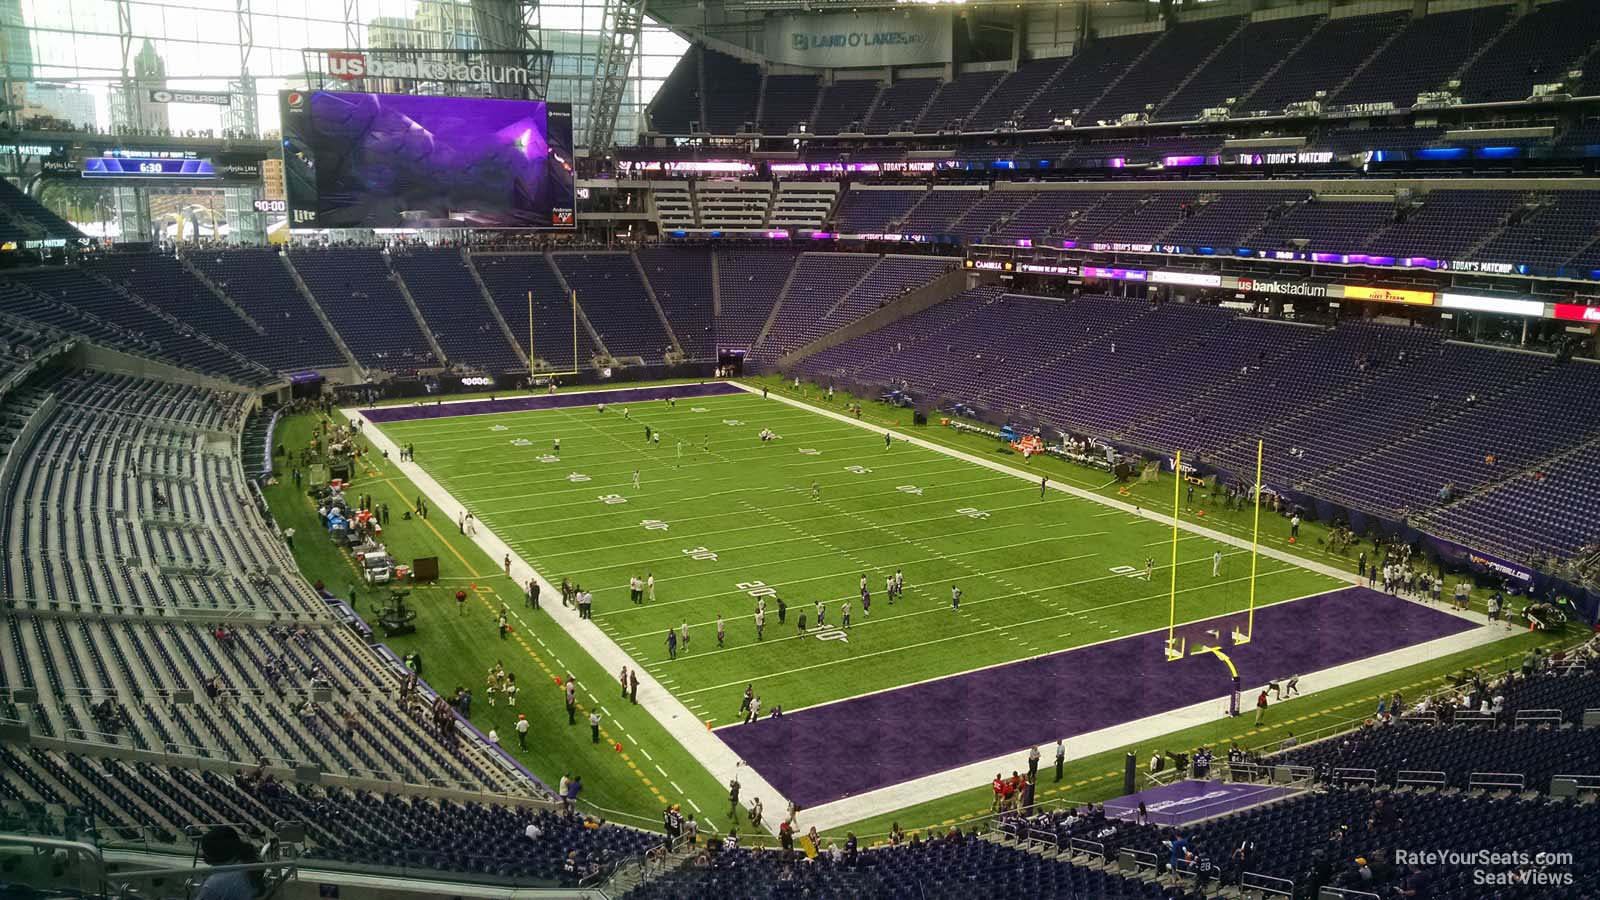 section 225, row 11 seat view  for football - u.s. bank stadium